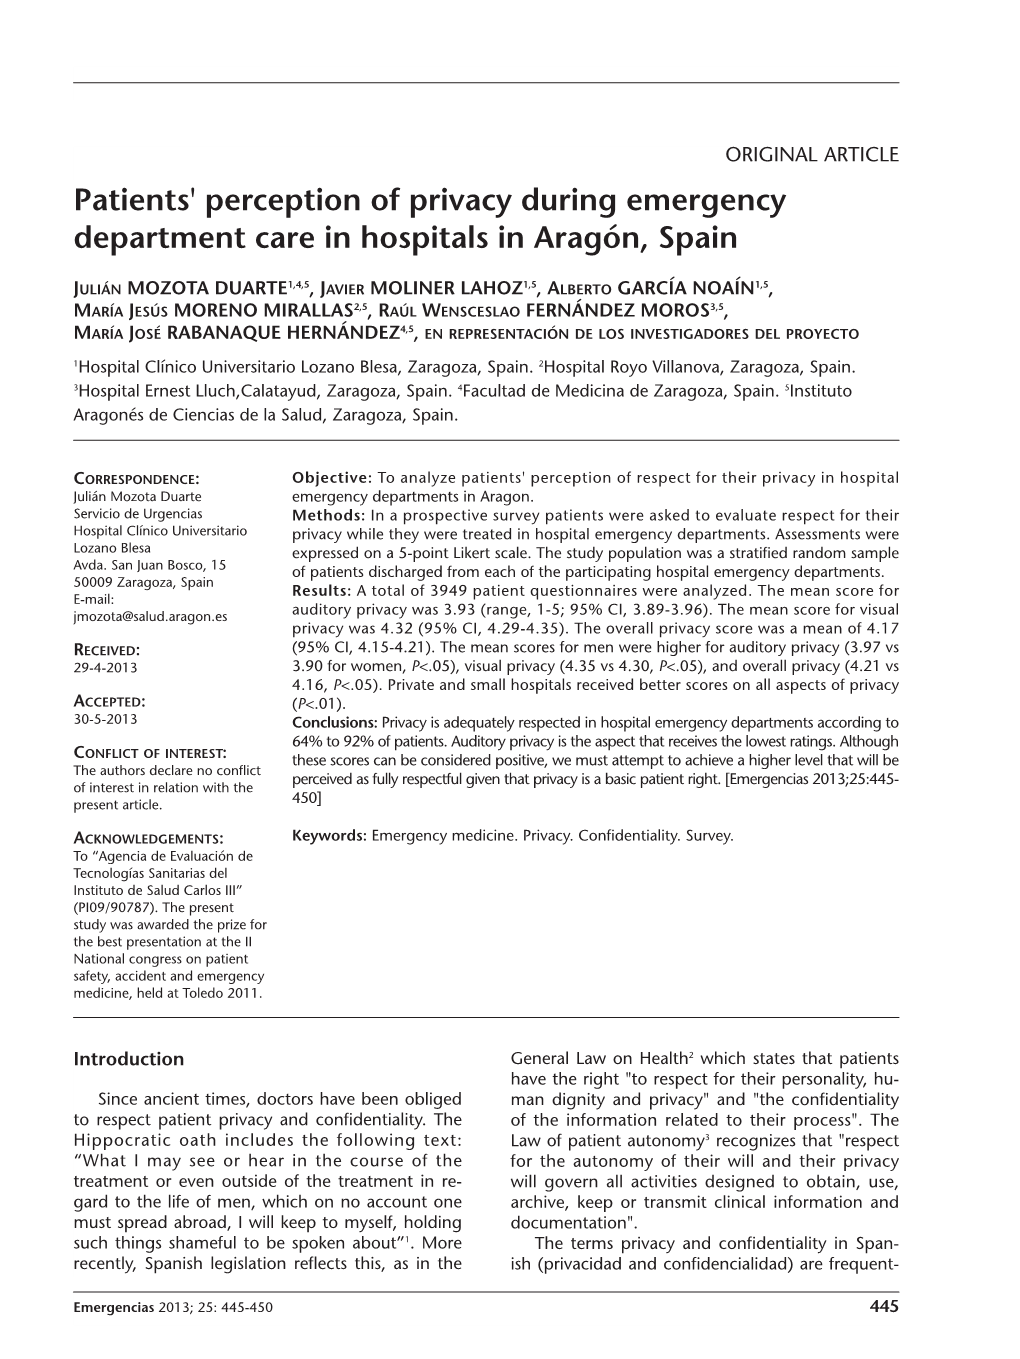 Patients' Perception of Privacy During Emergency Department Care in Hospitals in Aragón, Spain